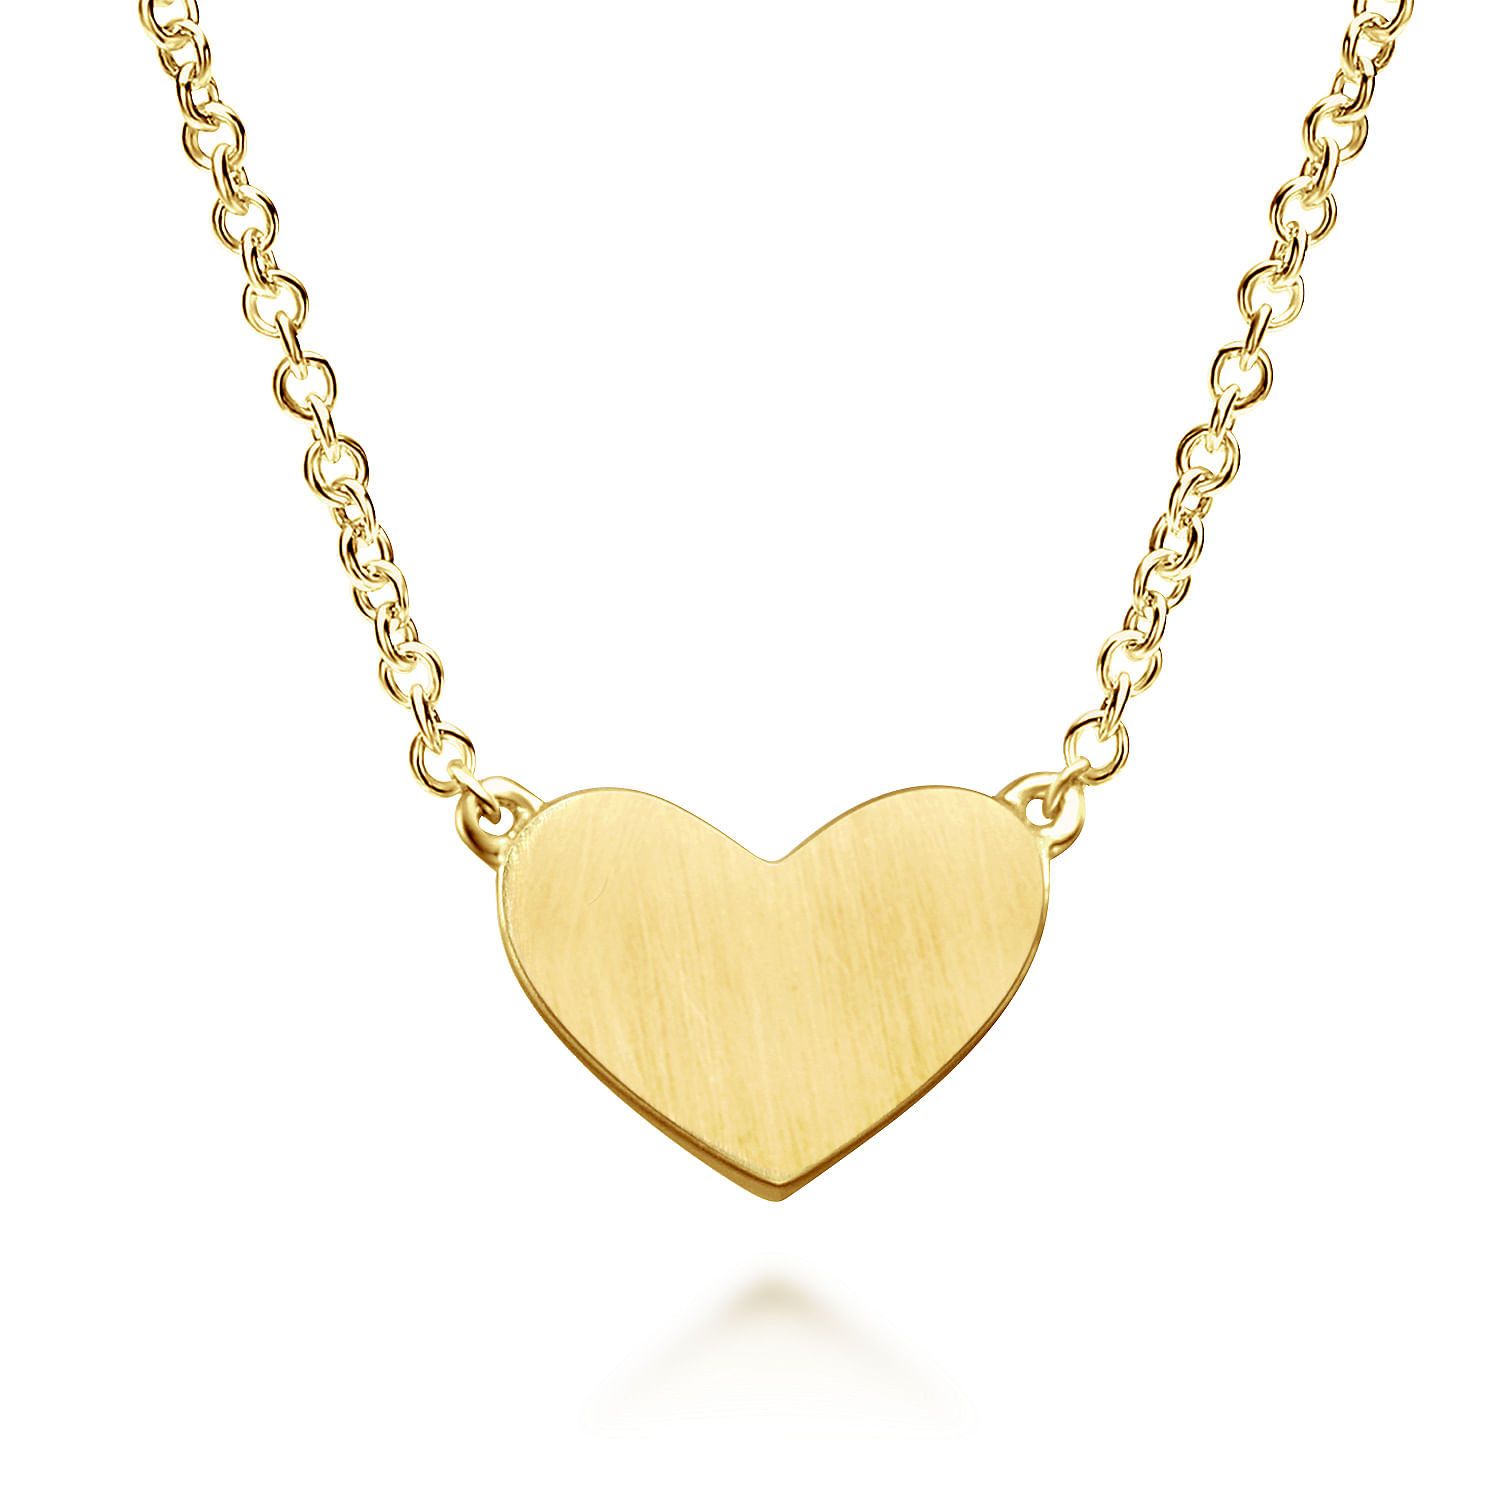 14K Yellow Gold Heart Pendant Necklace with Diamond Accent